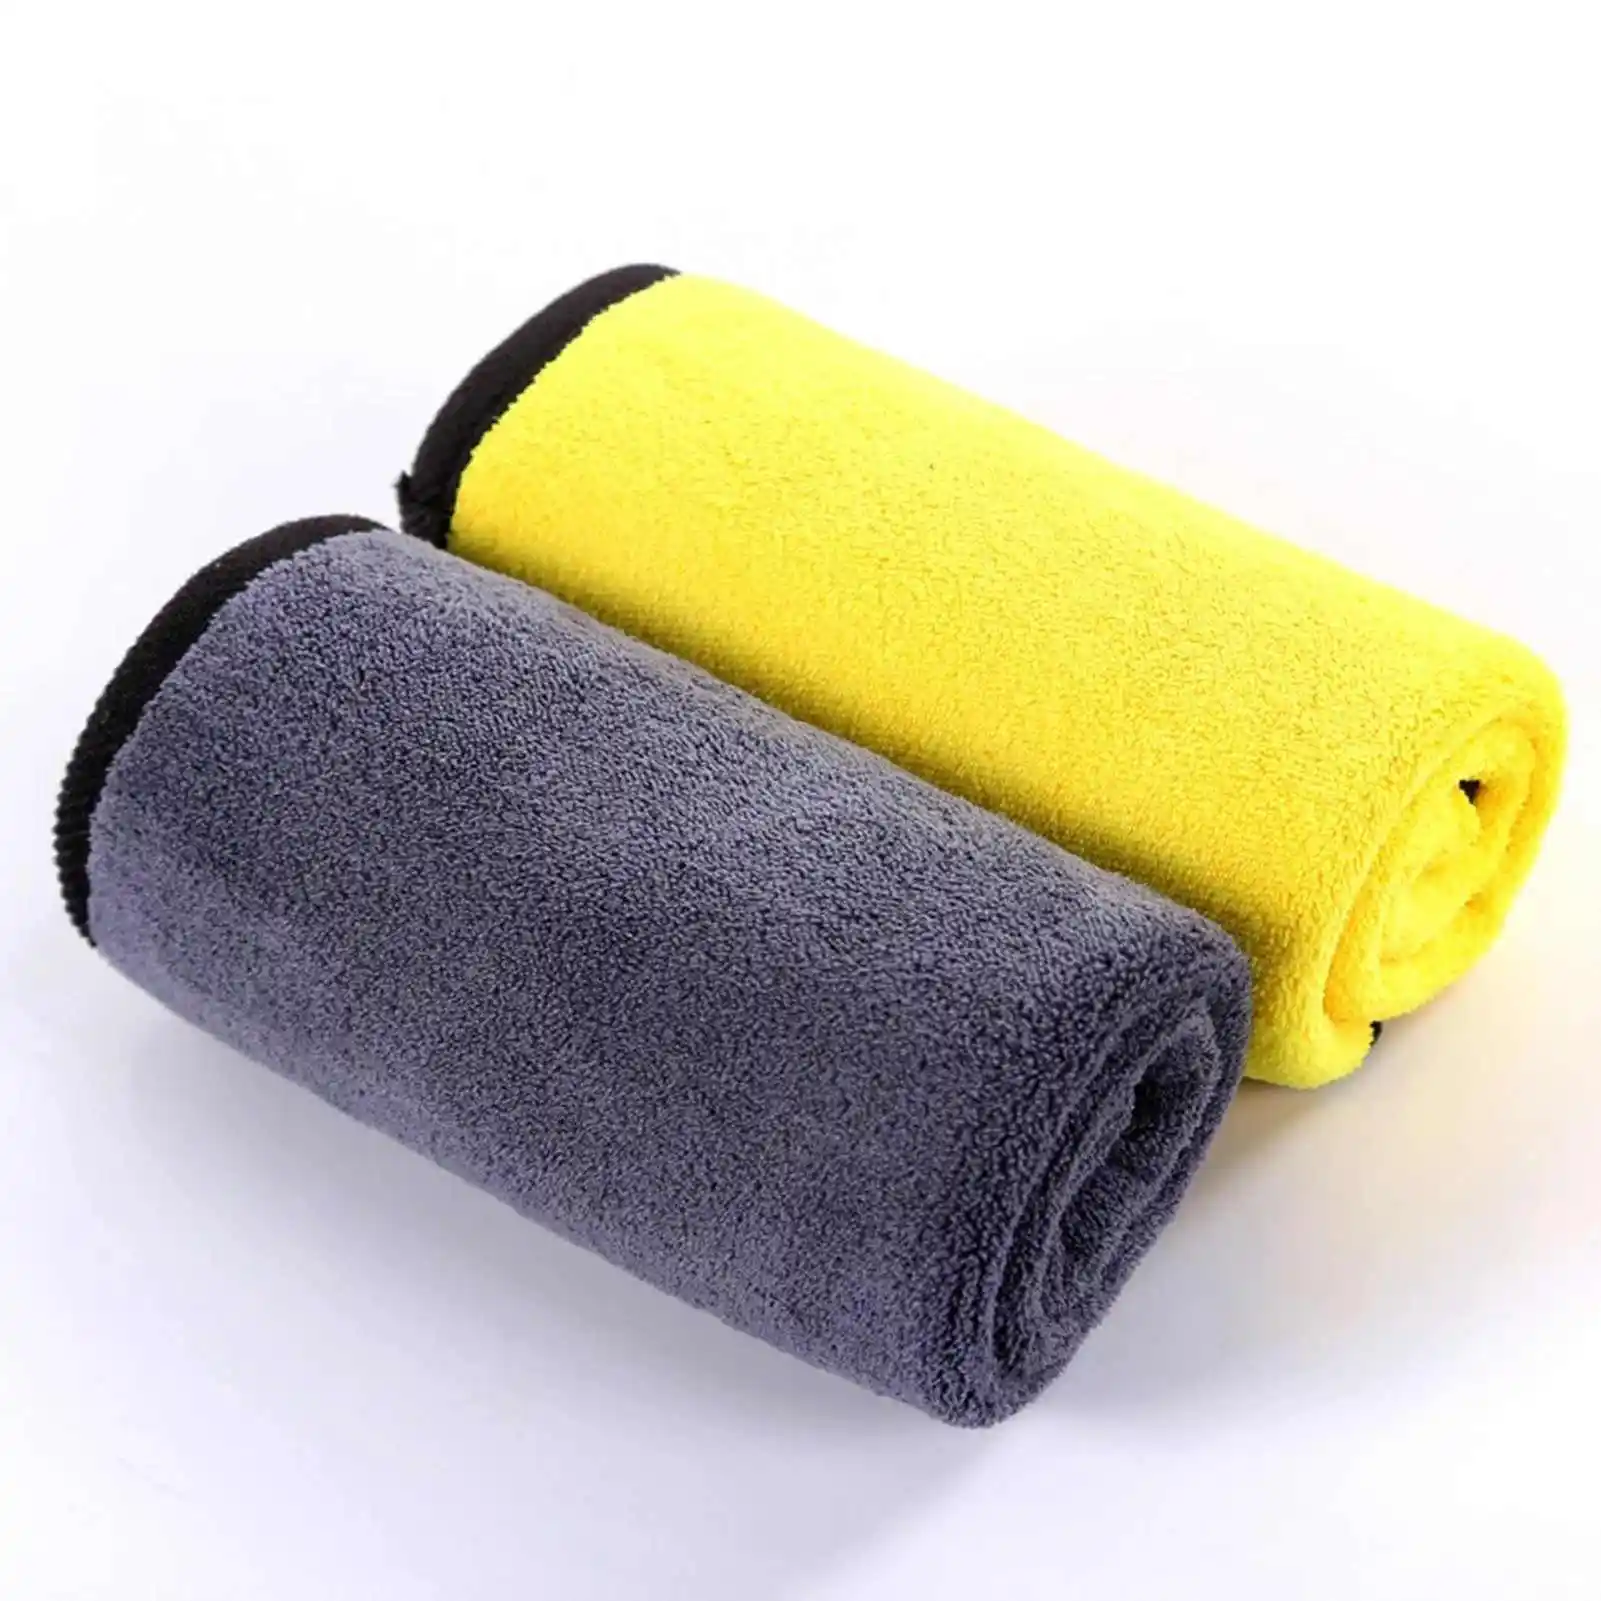 10Pcs Automotive Double-Sided Fleece Absorbent Towel Glass Cleaning Cloth Microfiber Cleaning Towel Car Wash Rags